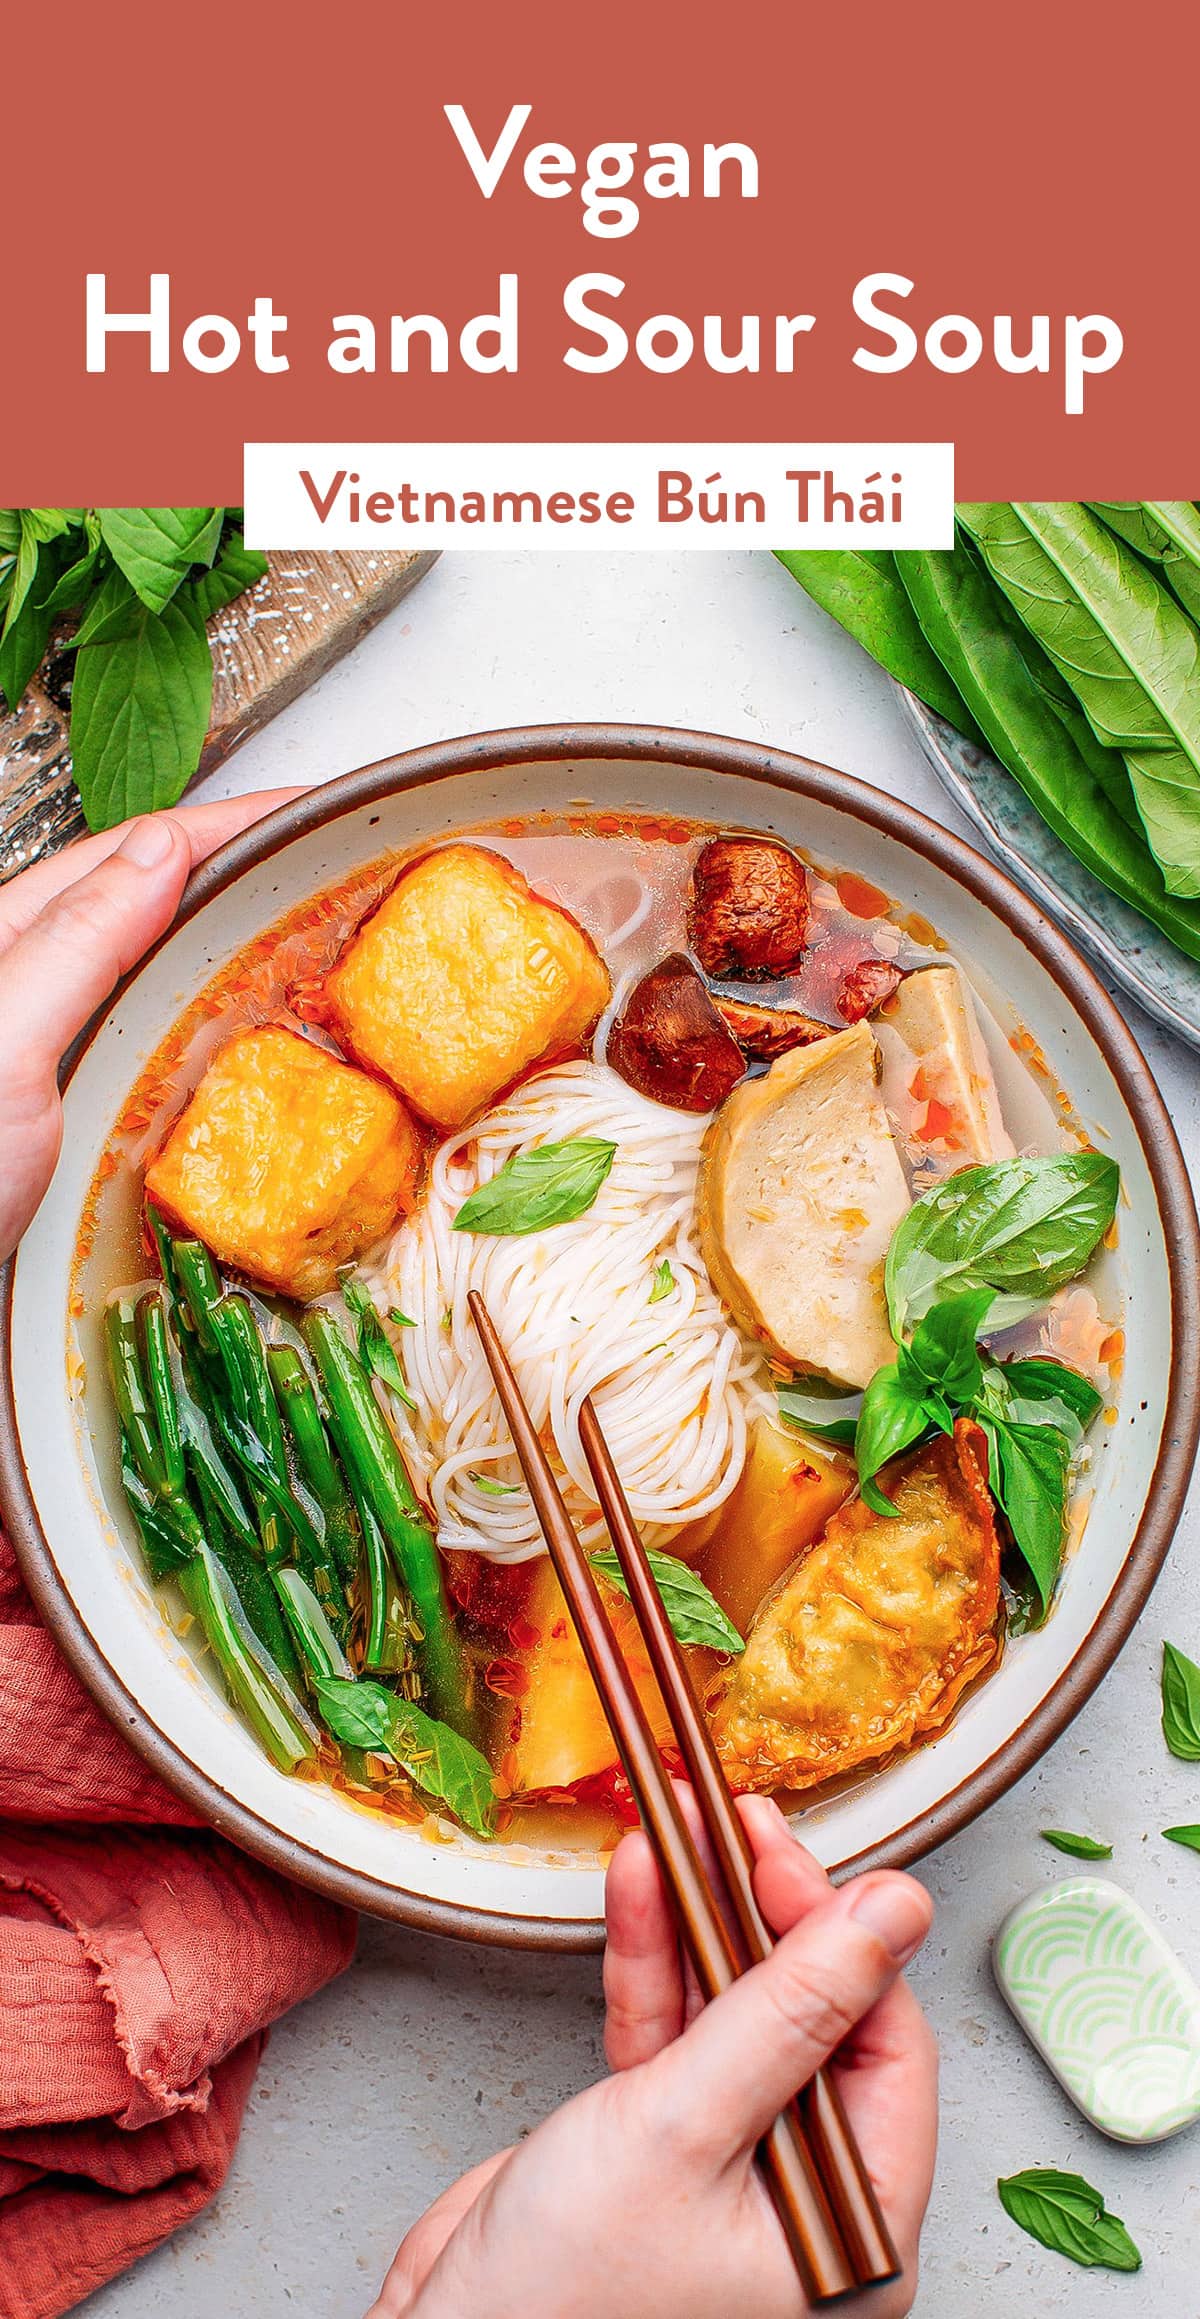 This vegan hot and sour soup is infused with lemongrass, tamarind juice, and pineapple for a wonderful harmony of sweet, sour, and spicy flavors. Served with rice noodles, fried tofu, and plenty of greens, this is one of our favorite Vietnamese noodle soups! #vietnamese #noodlesoup